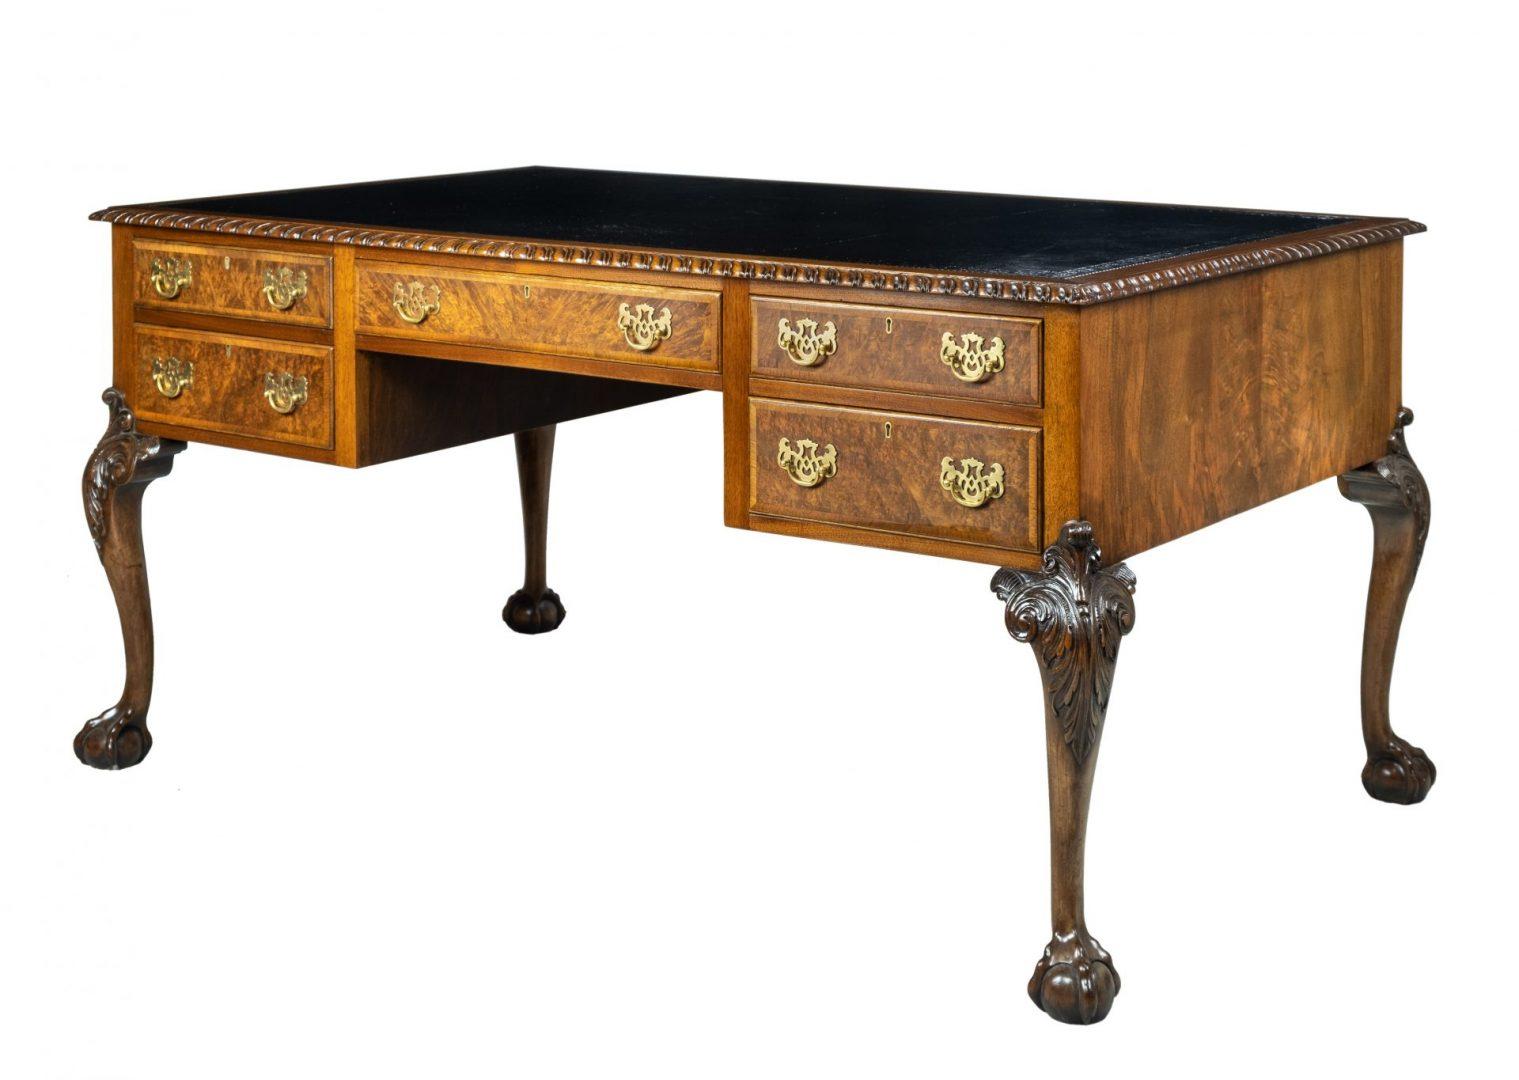 An early 20th century walnut desk, with tooled leather writing surface, five drawers and raised on cabriole legs, signed “Waring & Gillow” in the Chippendale style


Gillows of Lancaster and London, also known as Gillow & Co., was an English